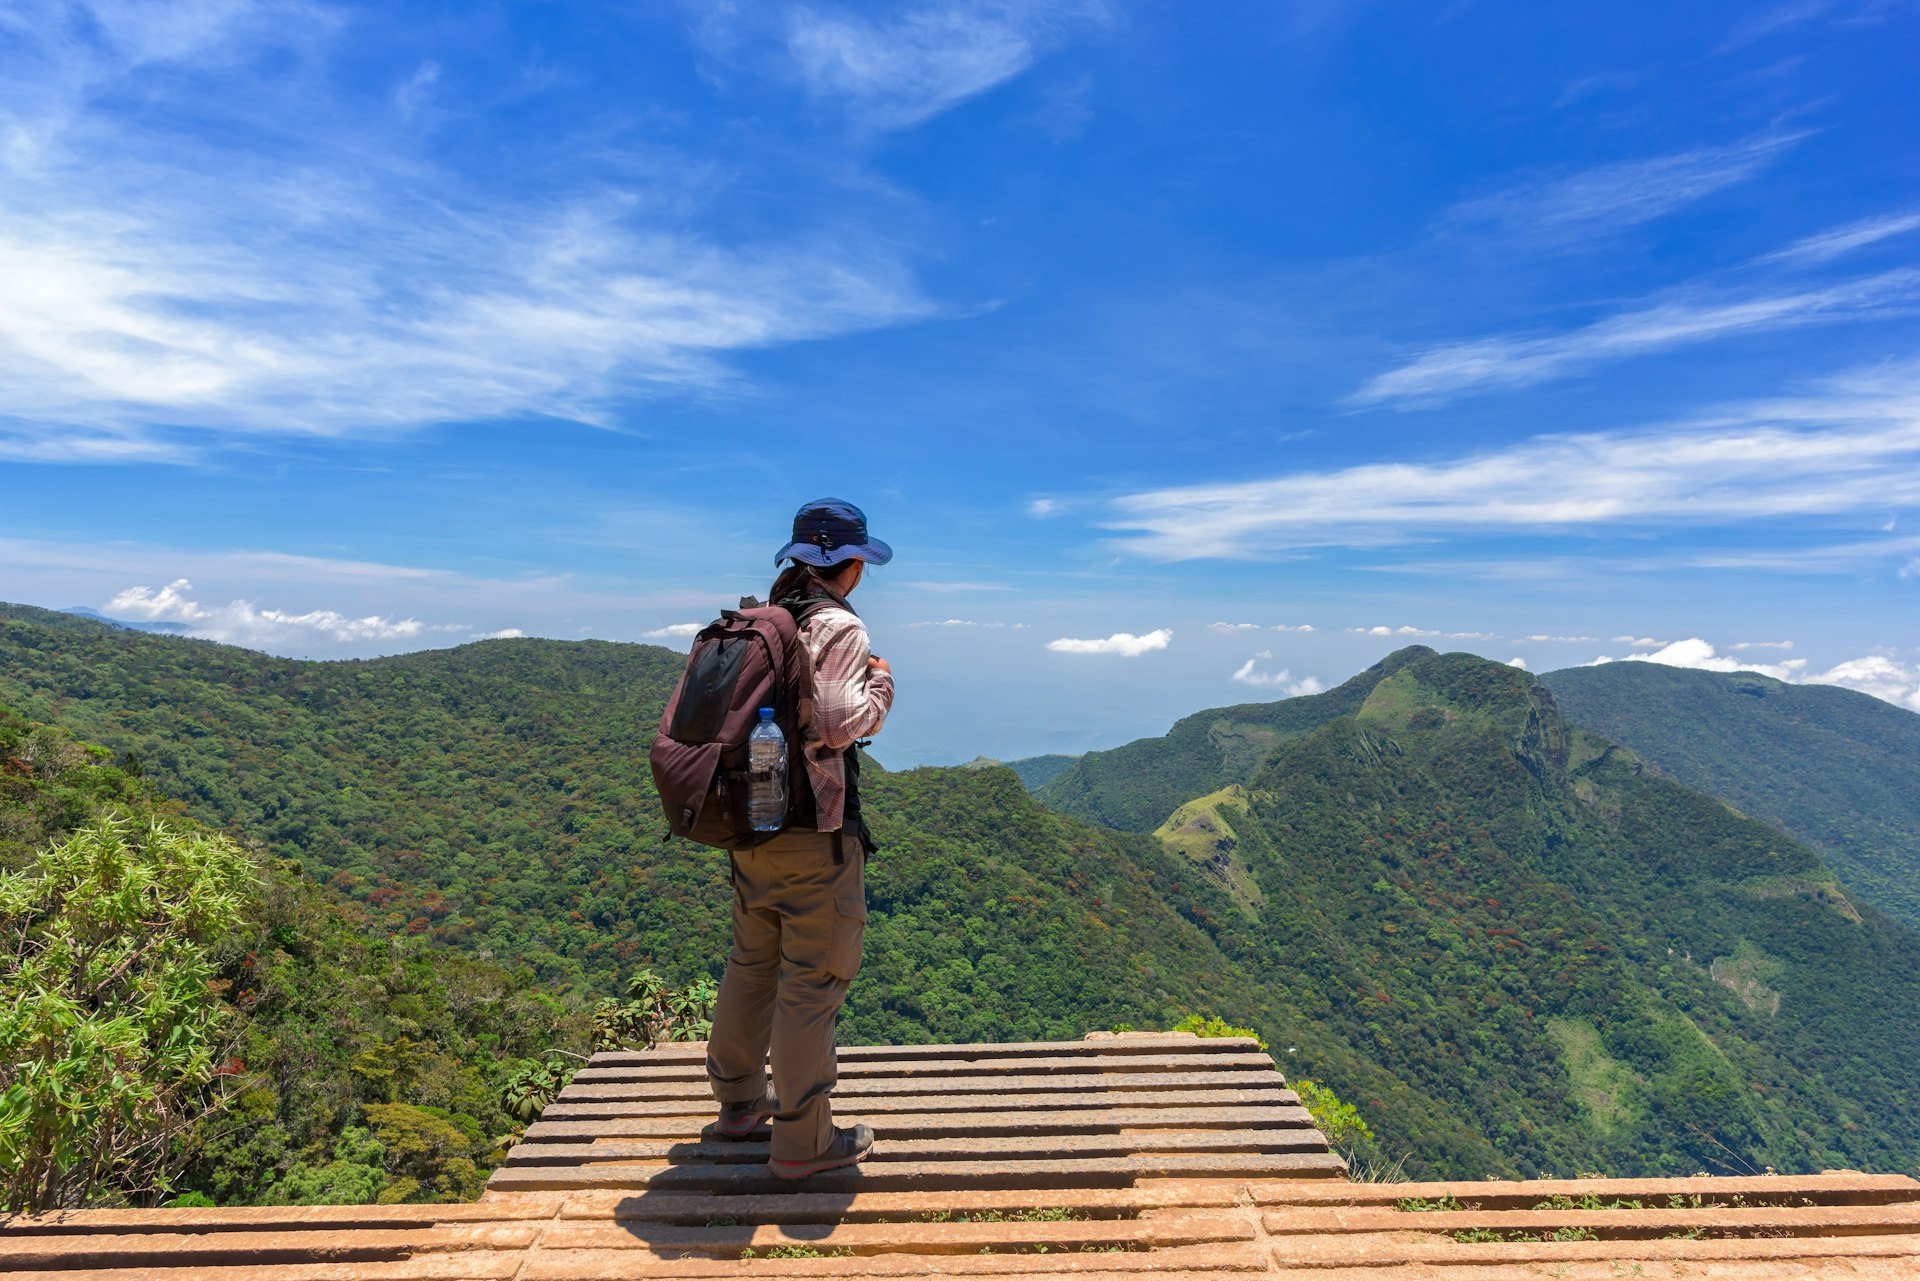 Man looking over the drop at World's End, Horton Plains National Park